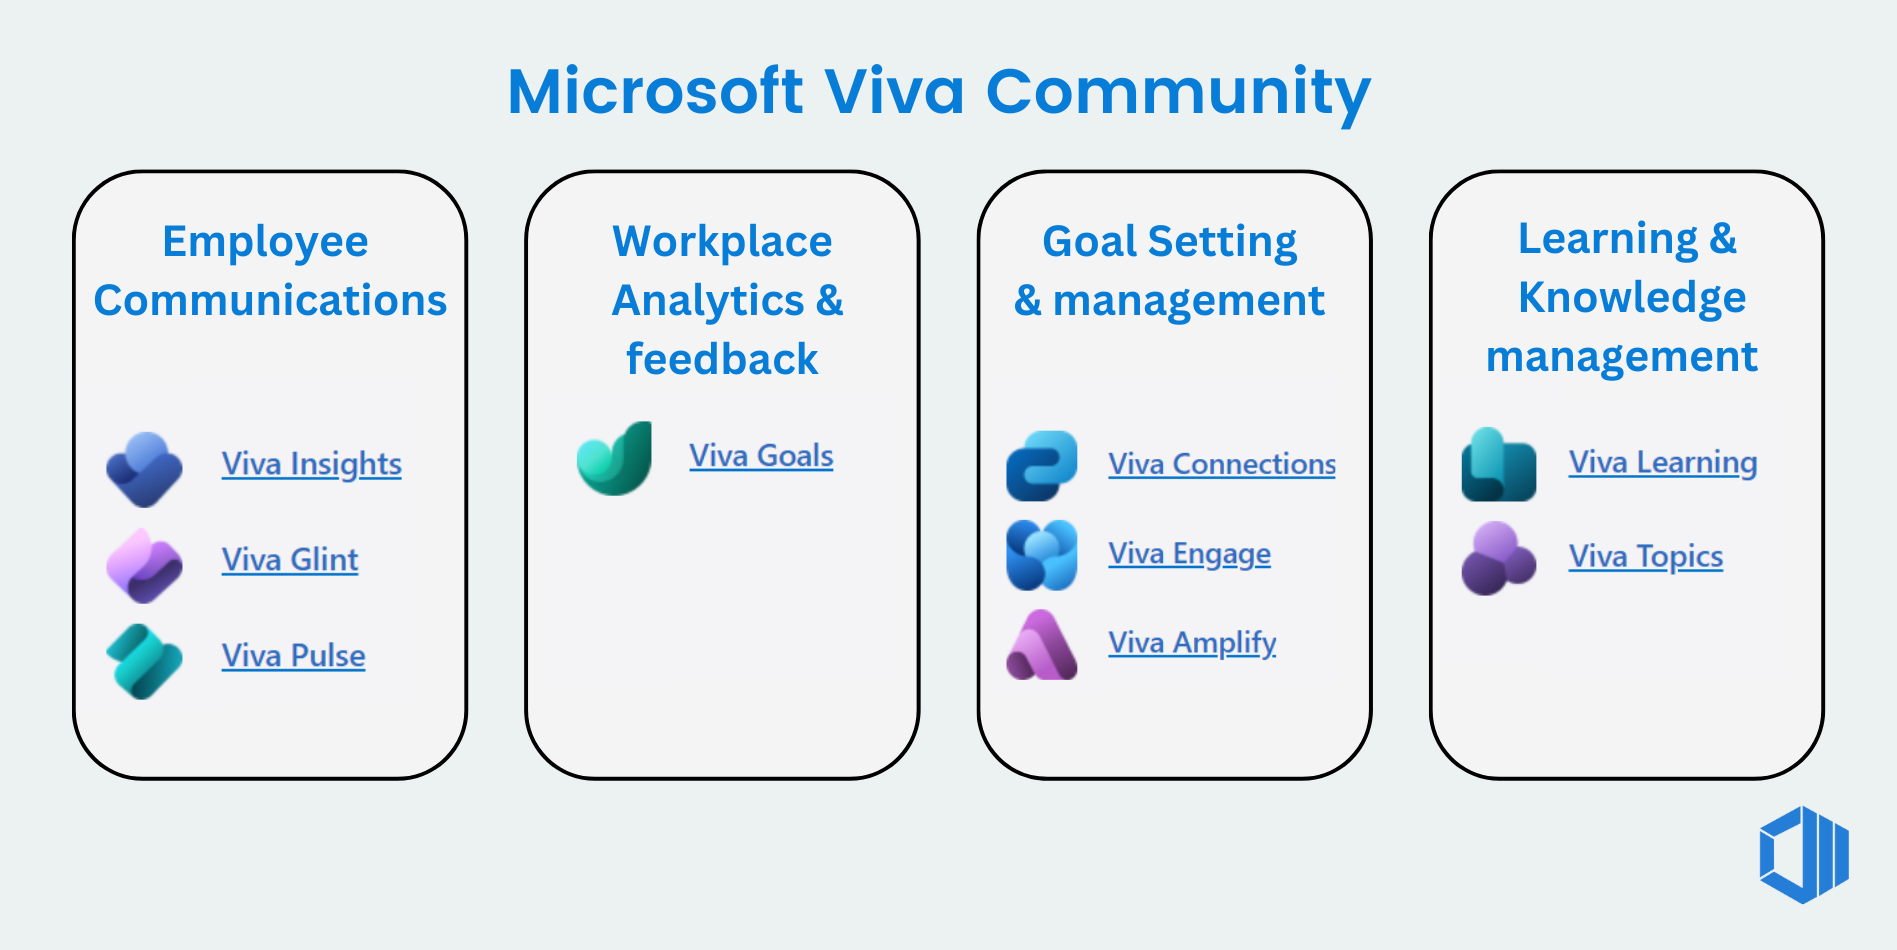 Viva Community  infographic - employee communication, workplace and analytics, goal setting, learning and knowledge mangement 